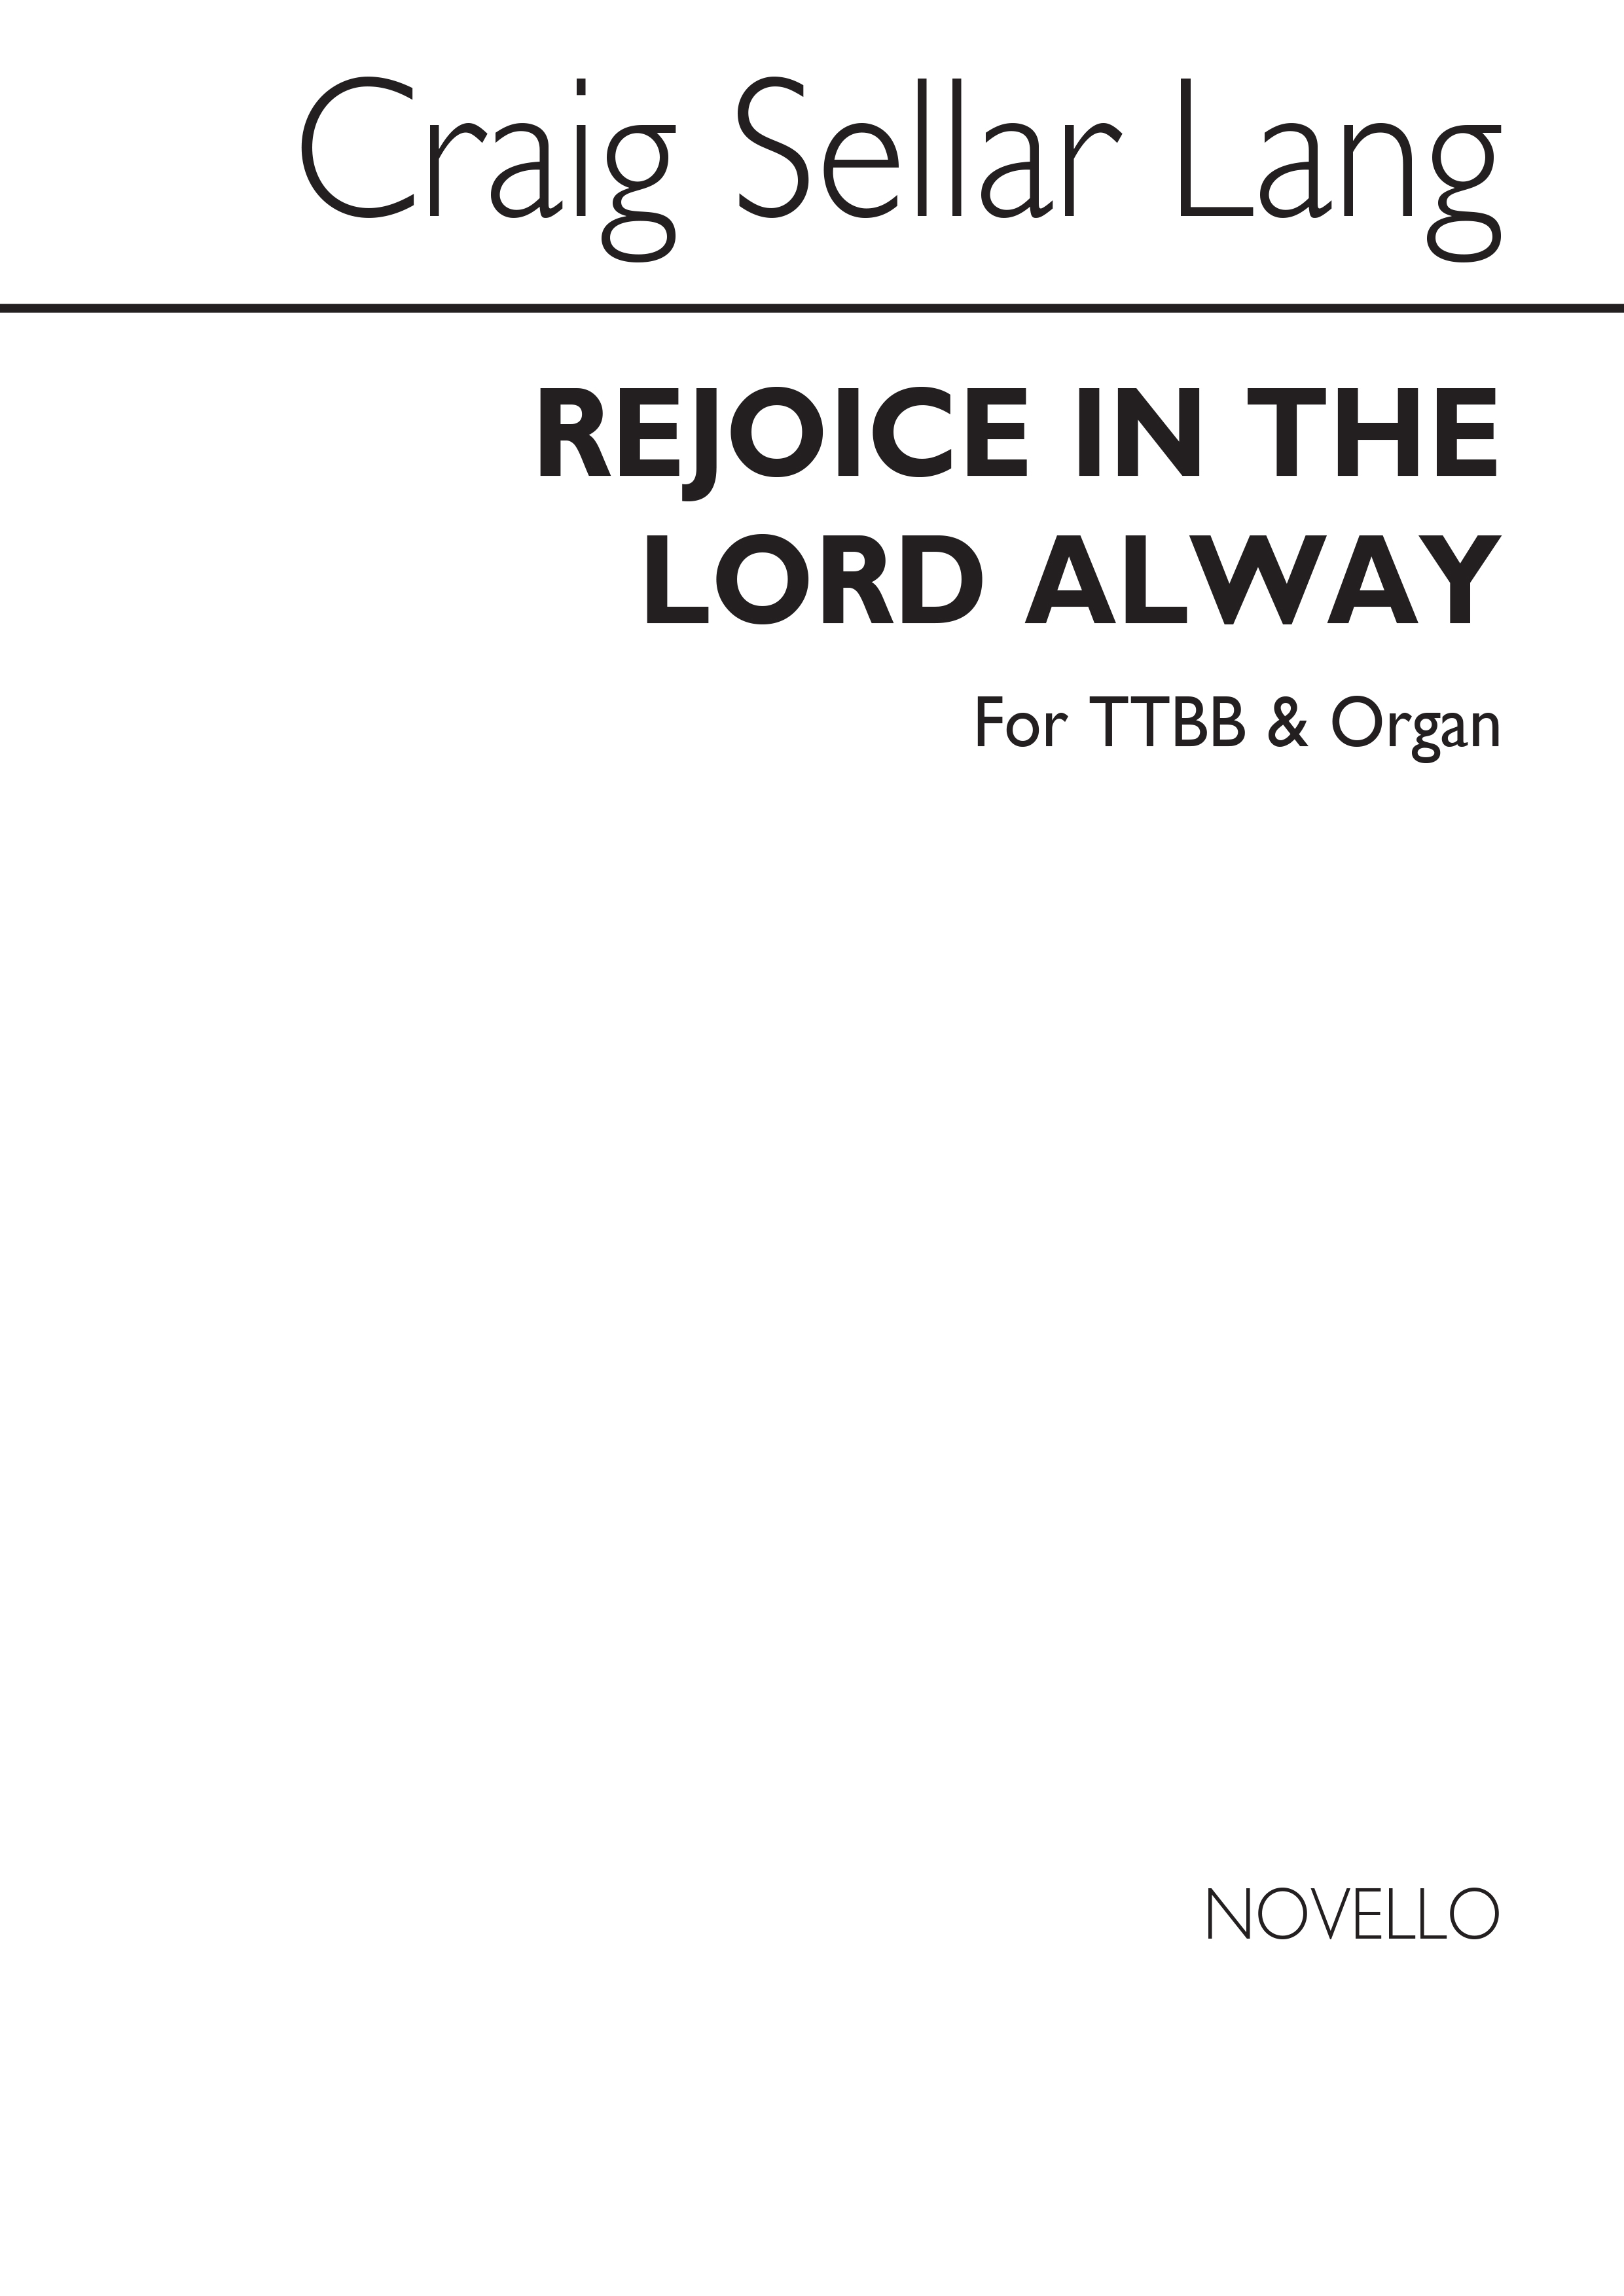 C.S. Lang: Rejoice In The Lord Always